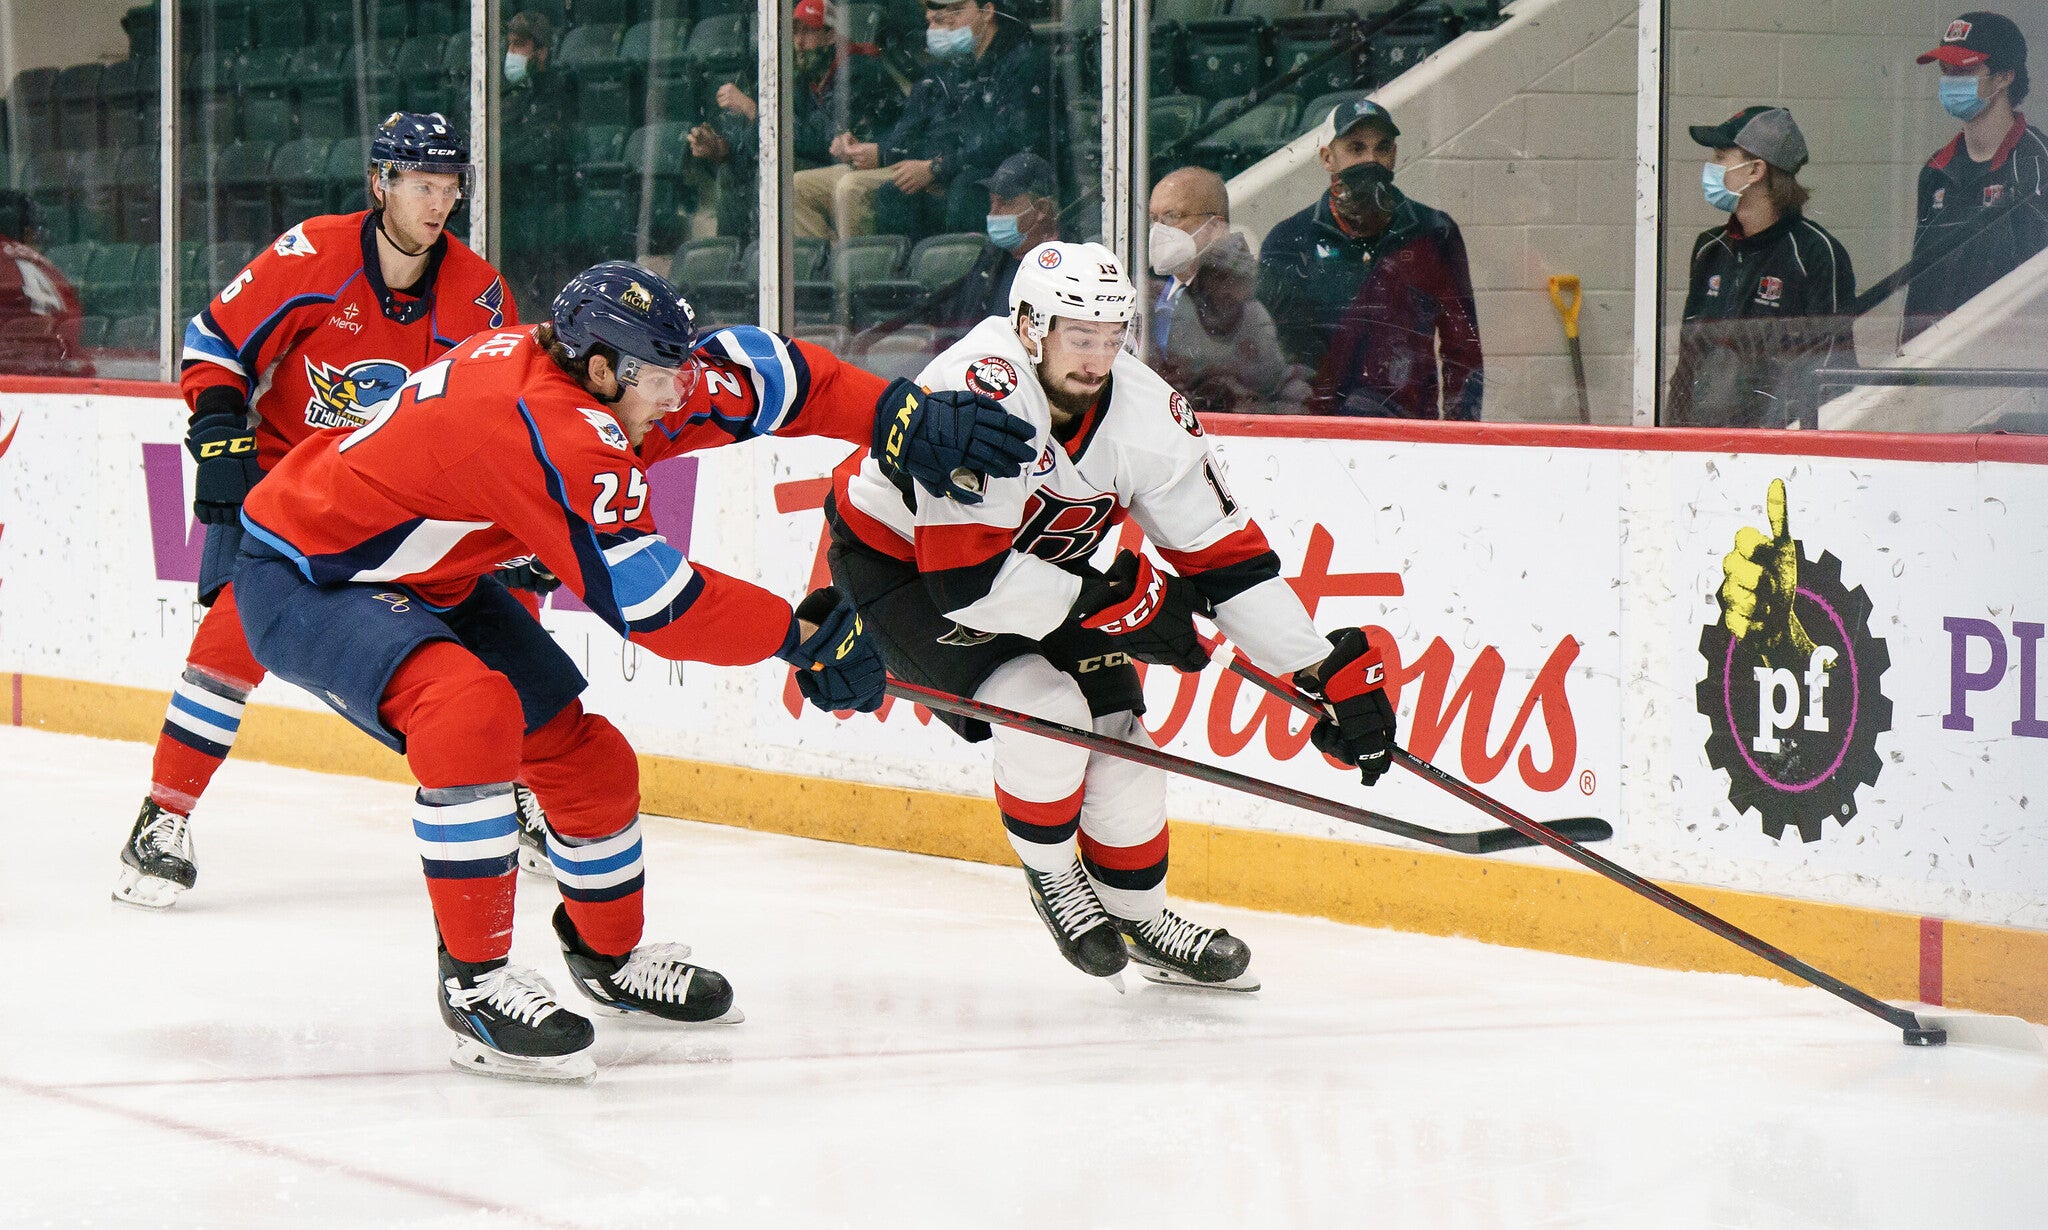 Springfield Thunderbirds - Only 3 hours left to bid on some game